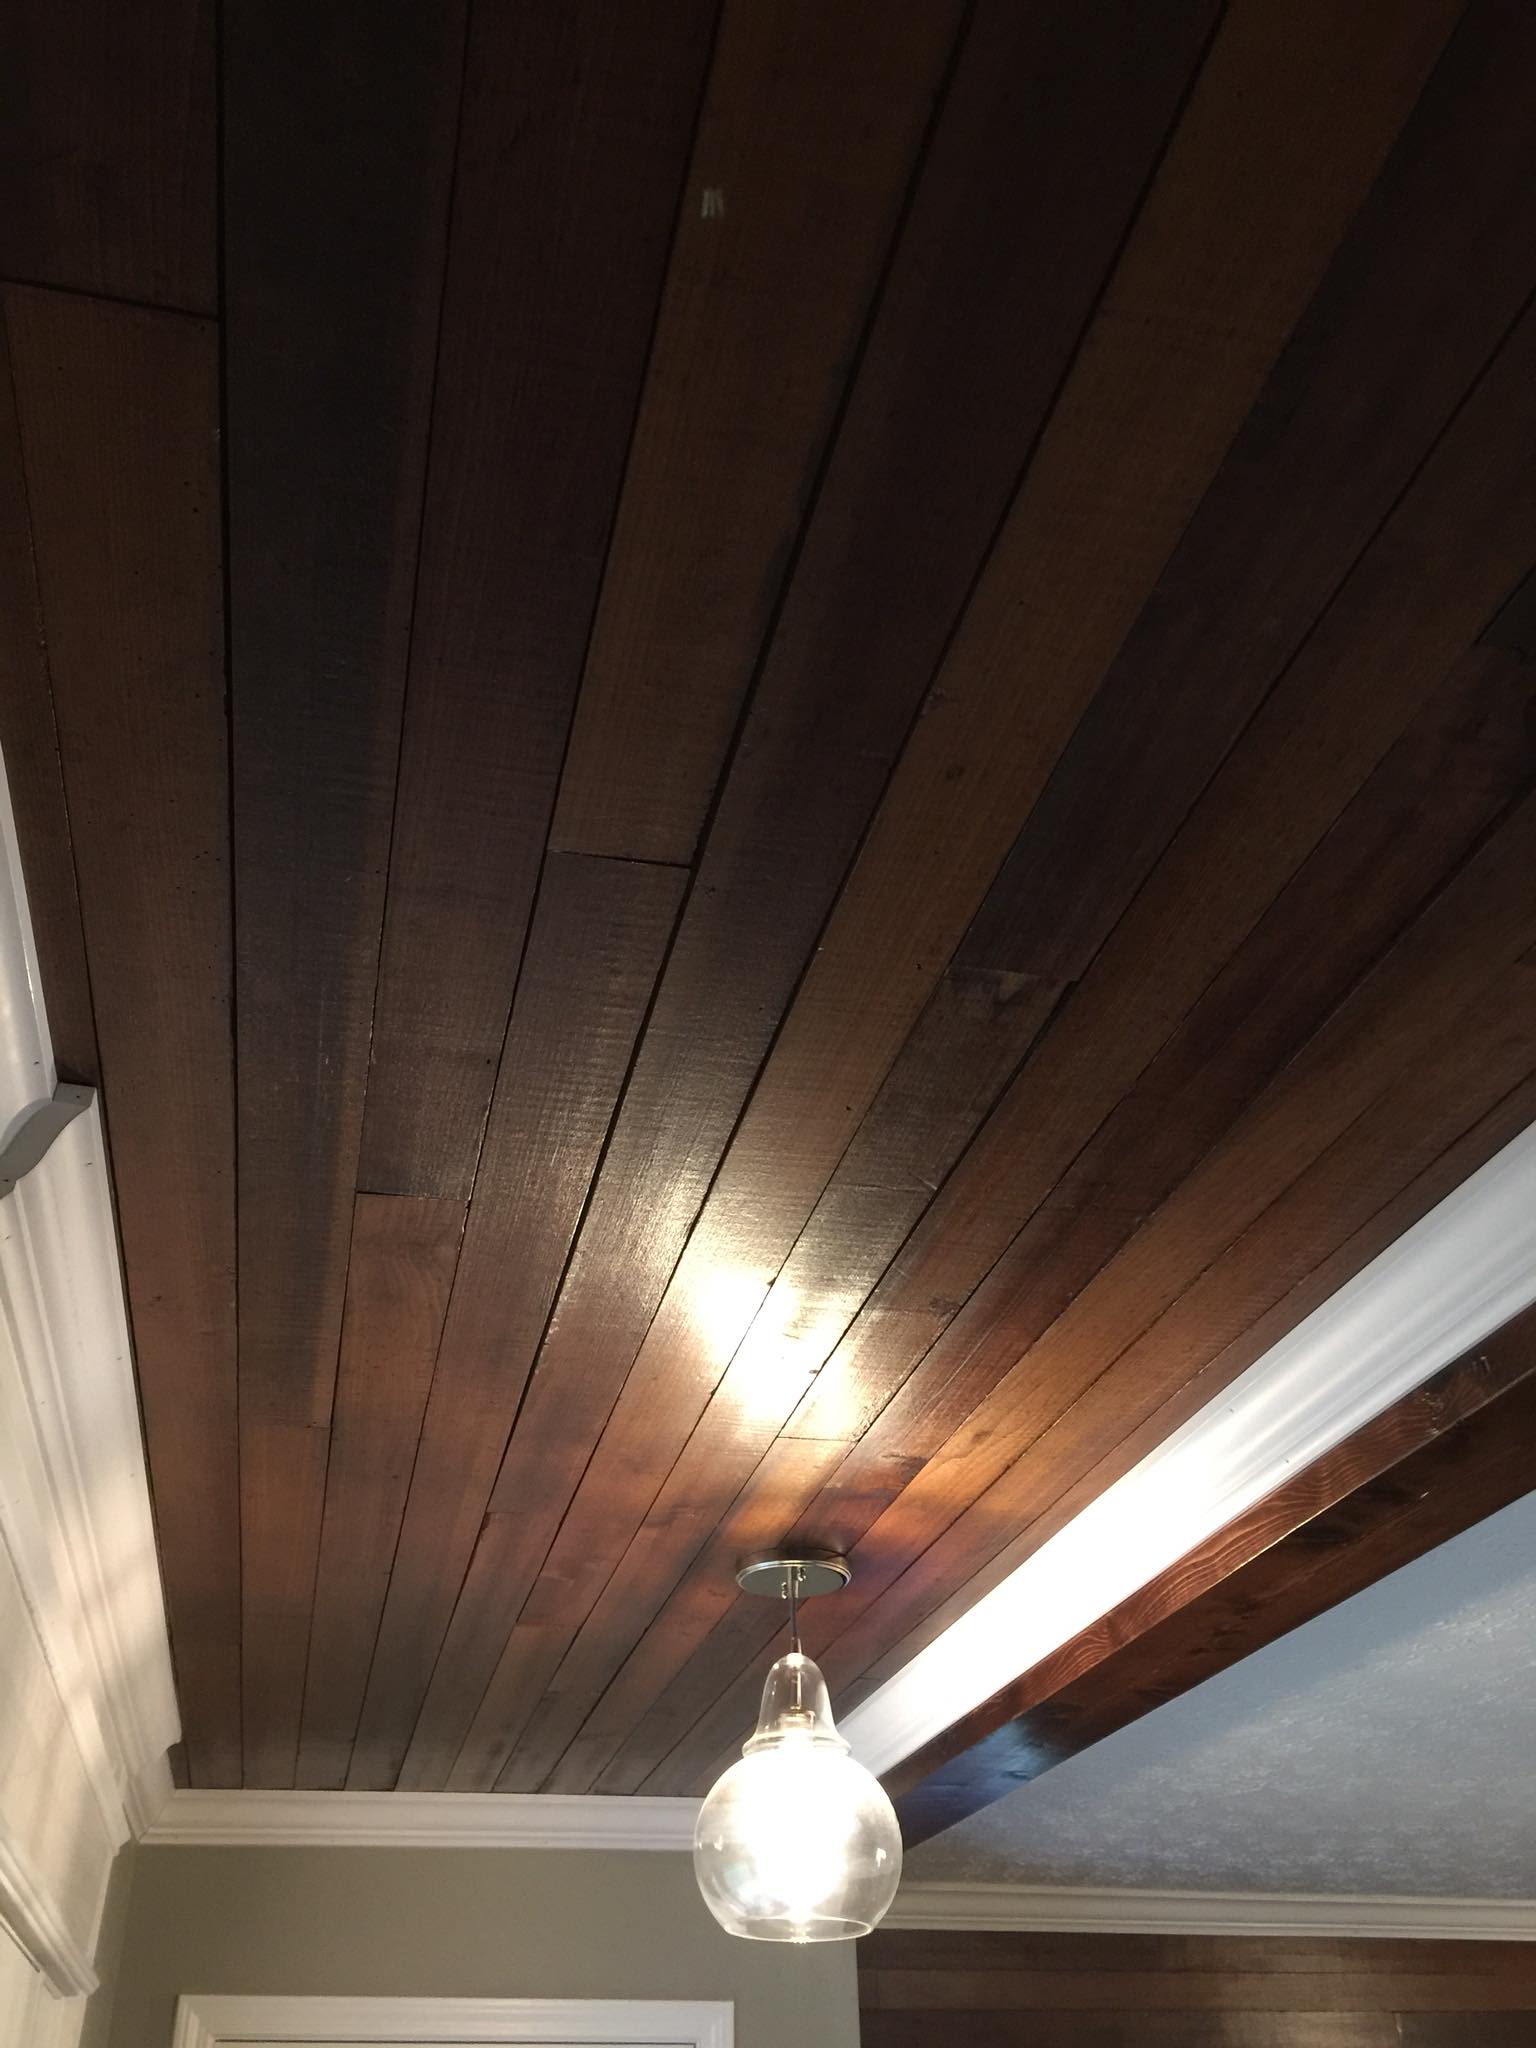 1900s Reclaimed Wood Planks installed on Ceiling and Stained 2